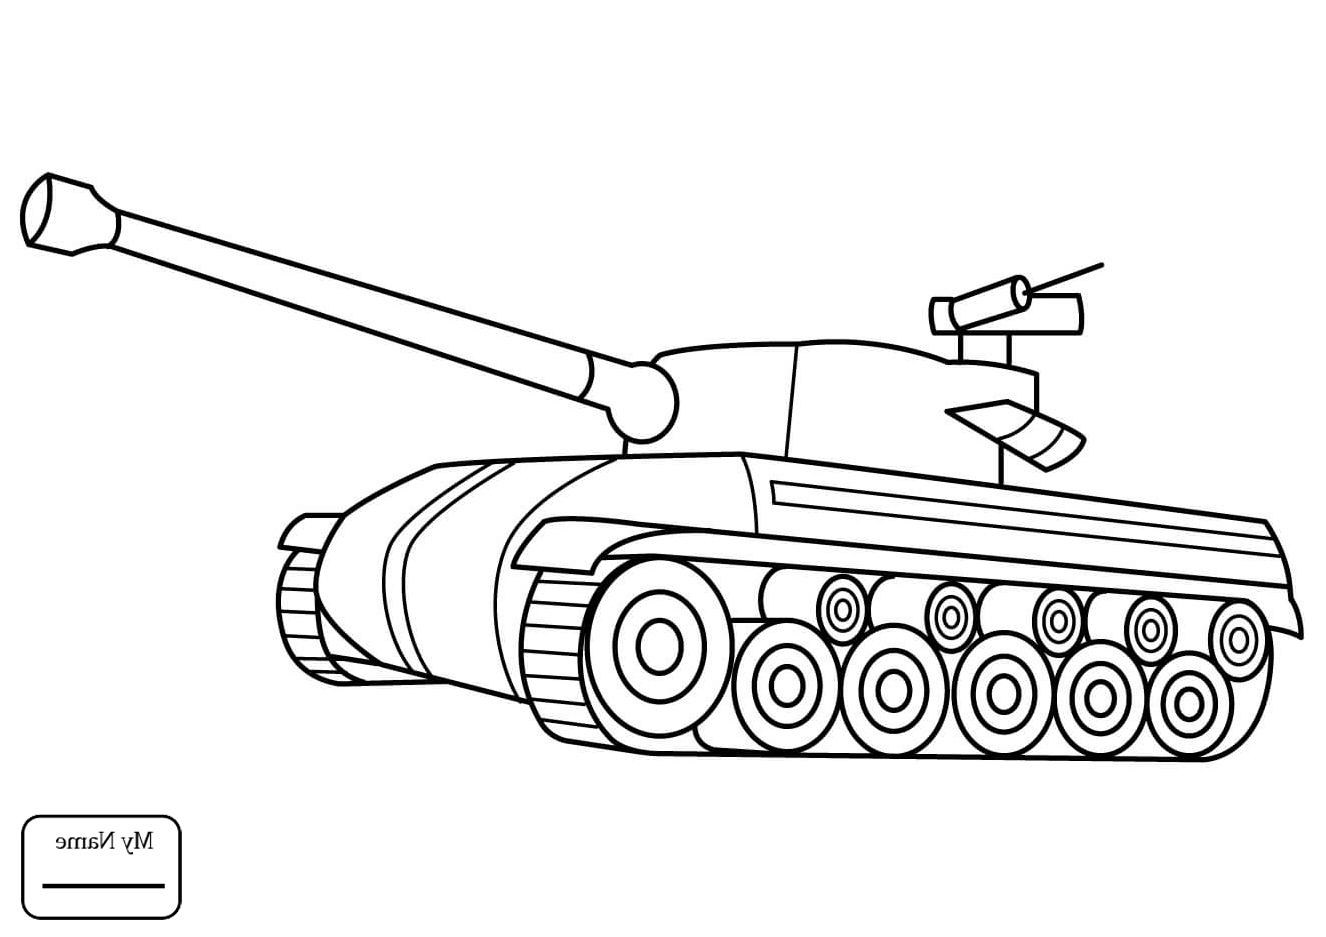 how to draw a military tank easy quick